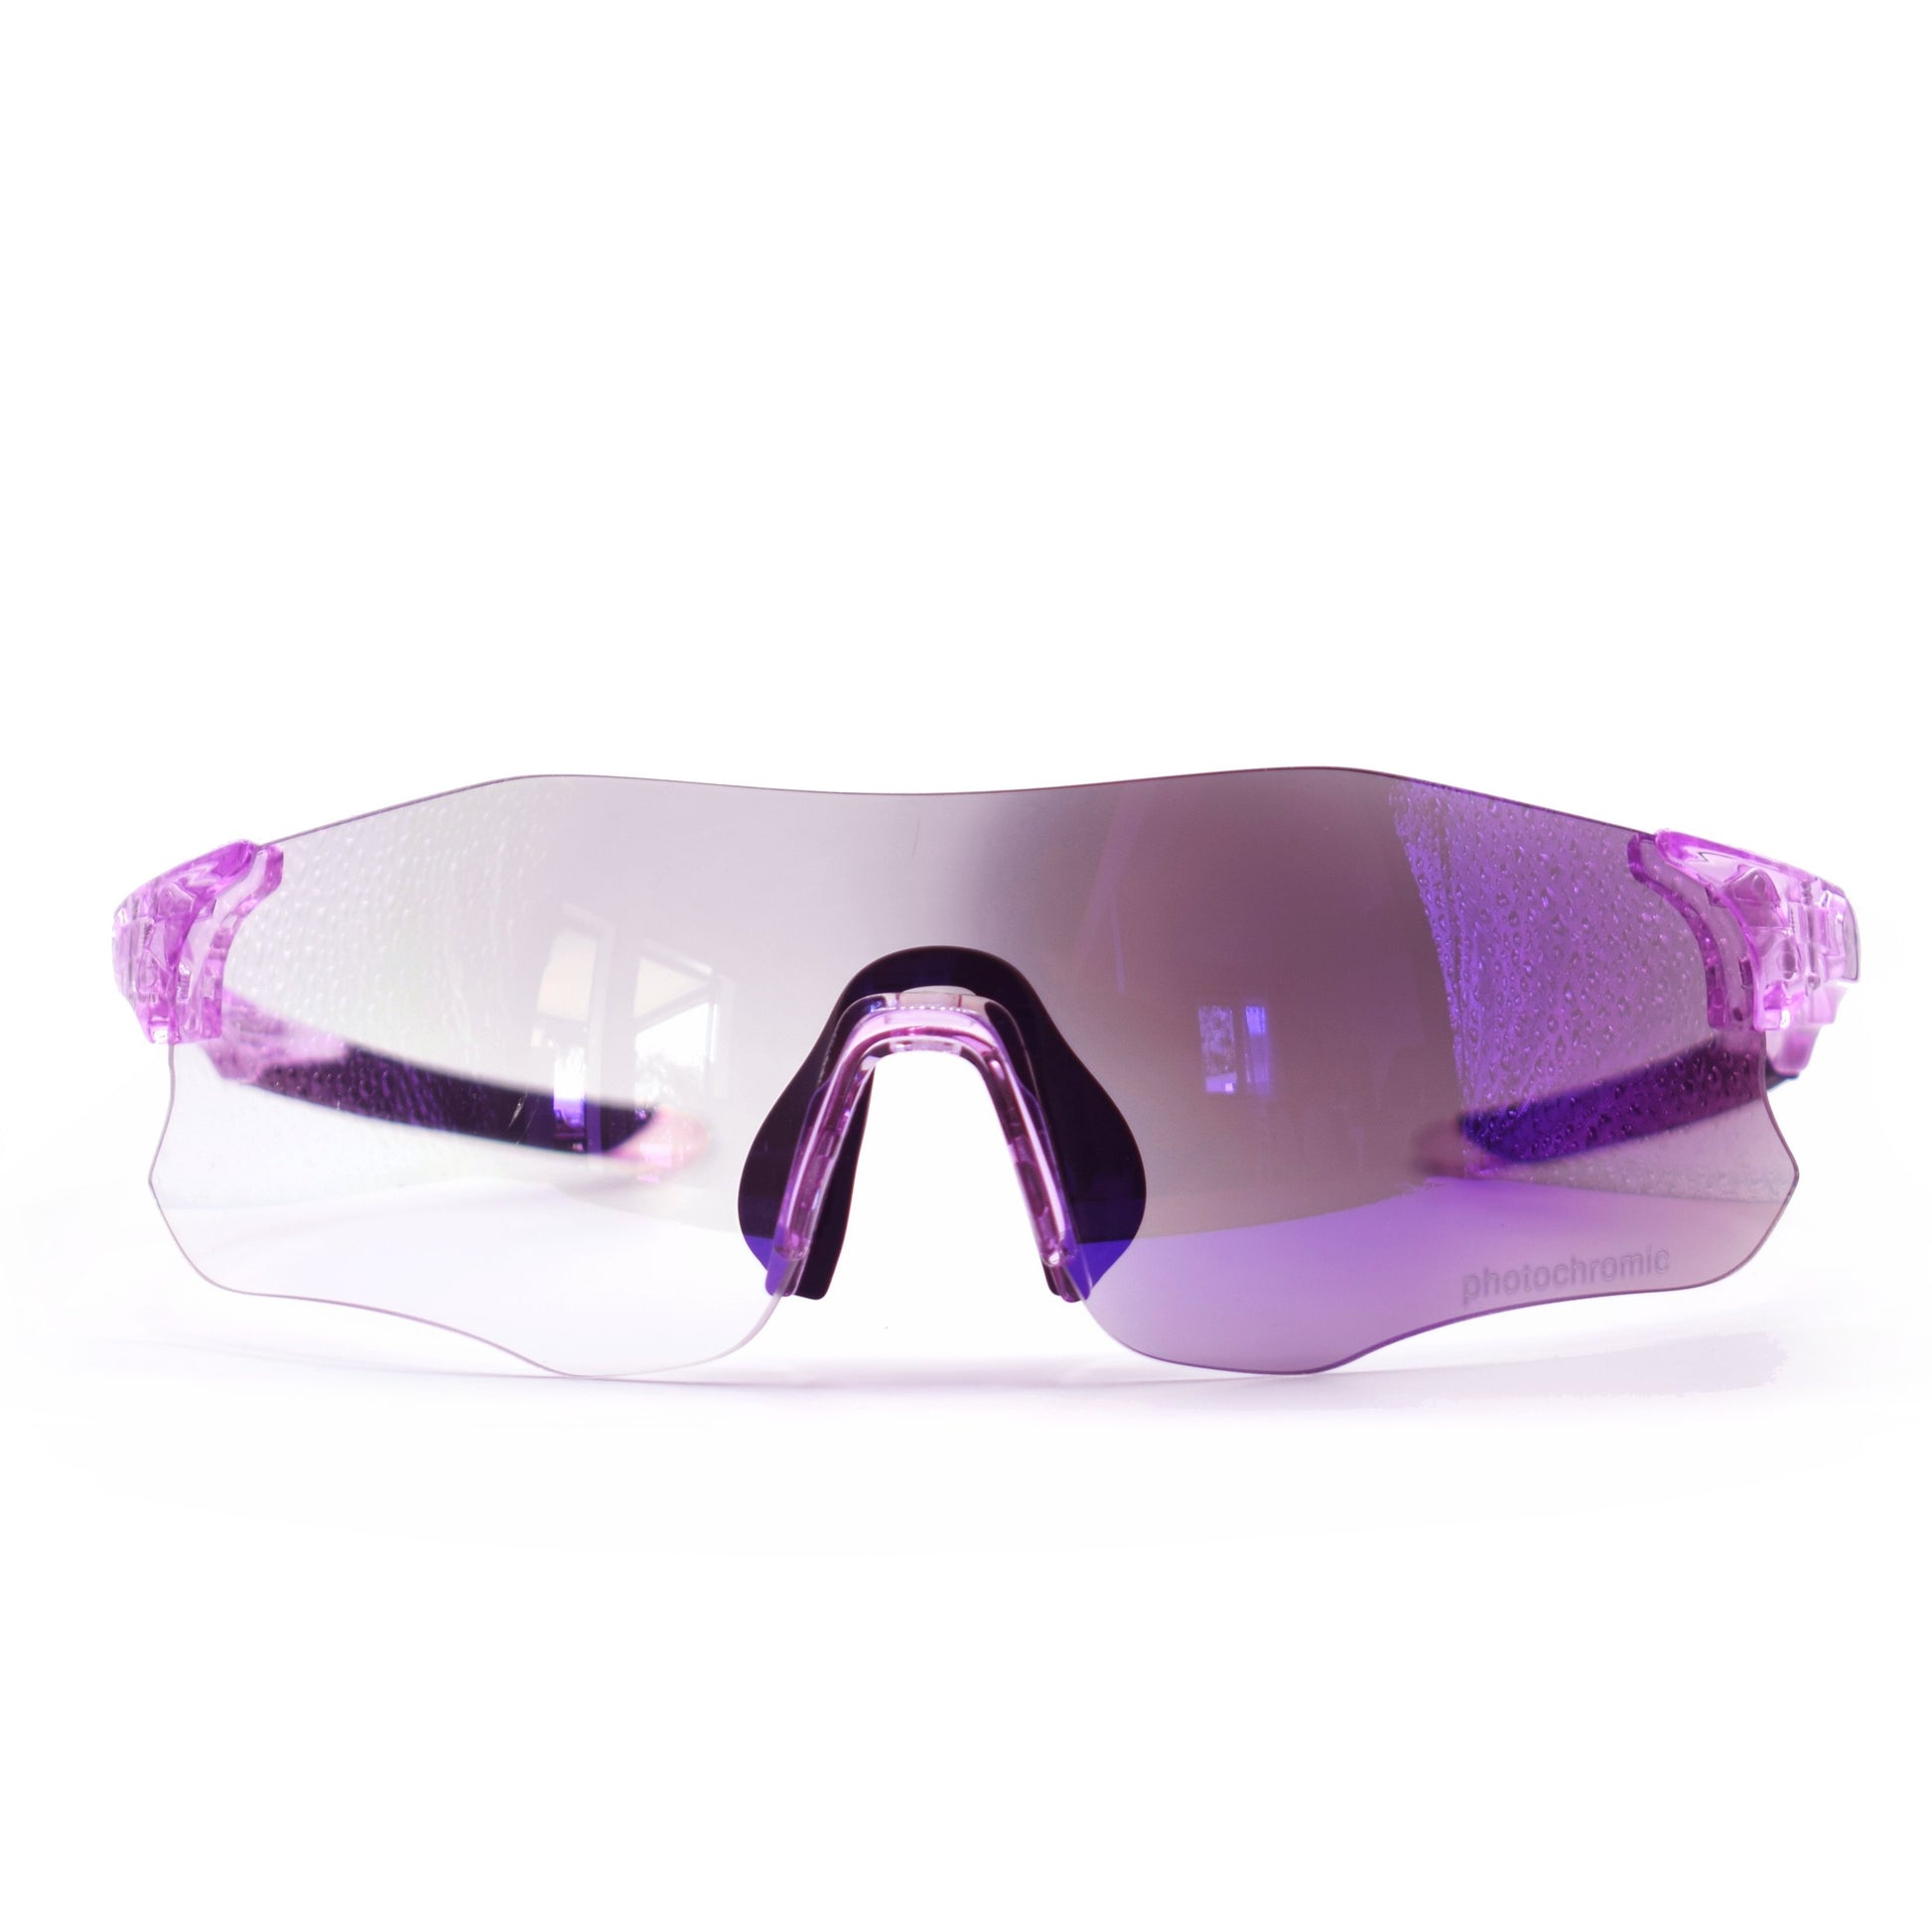 Flamingo Women Cycling Glasses - Front view photochromic